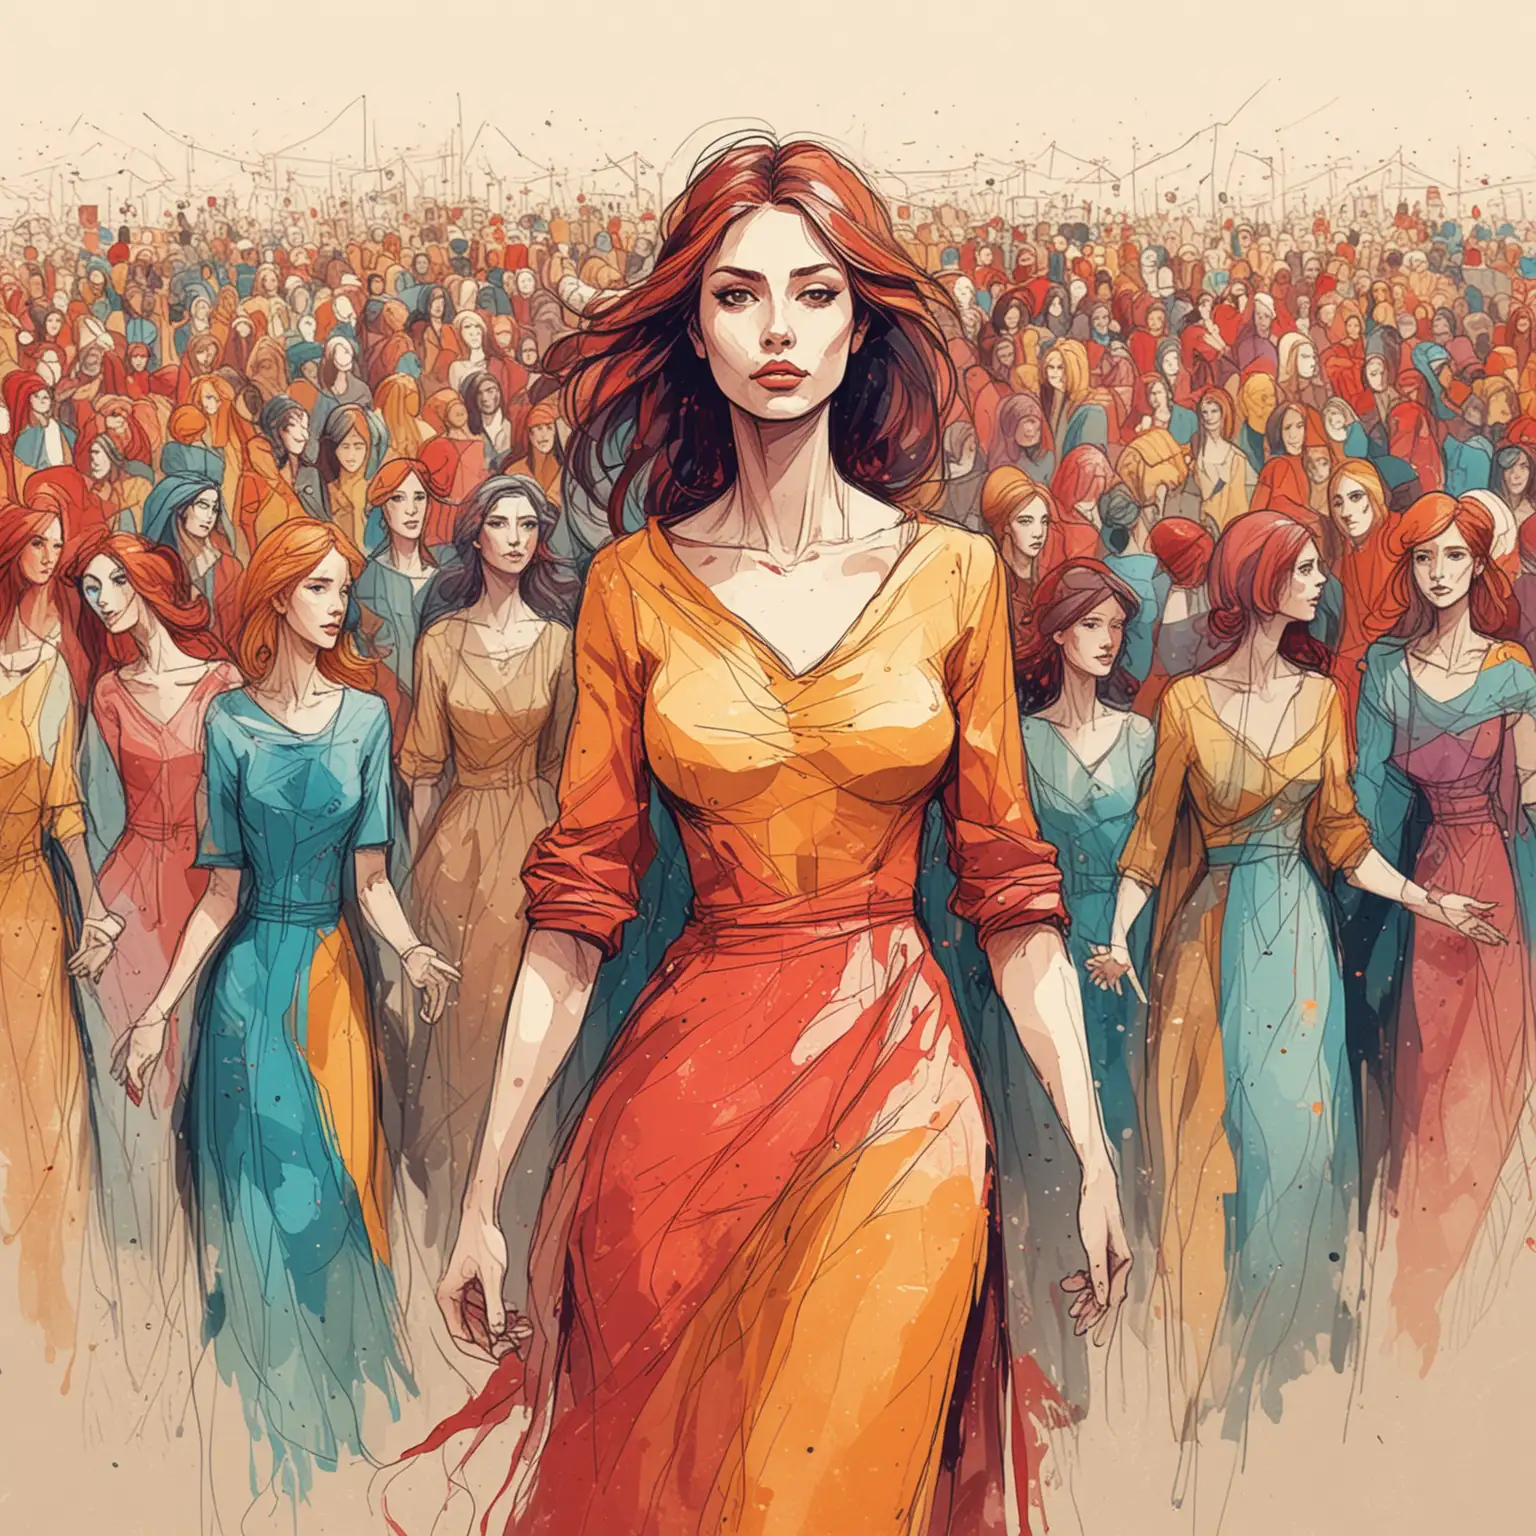 colorful sketch illustration of a woman leading a mass of women in abstract style